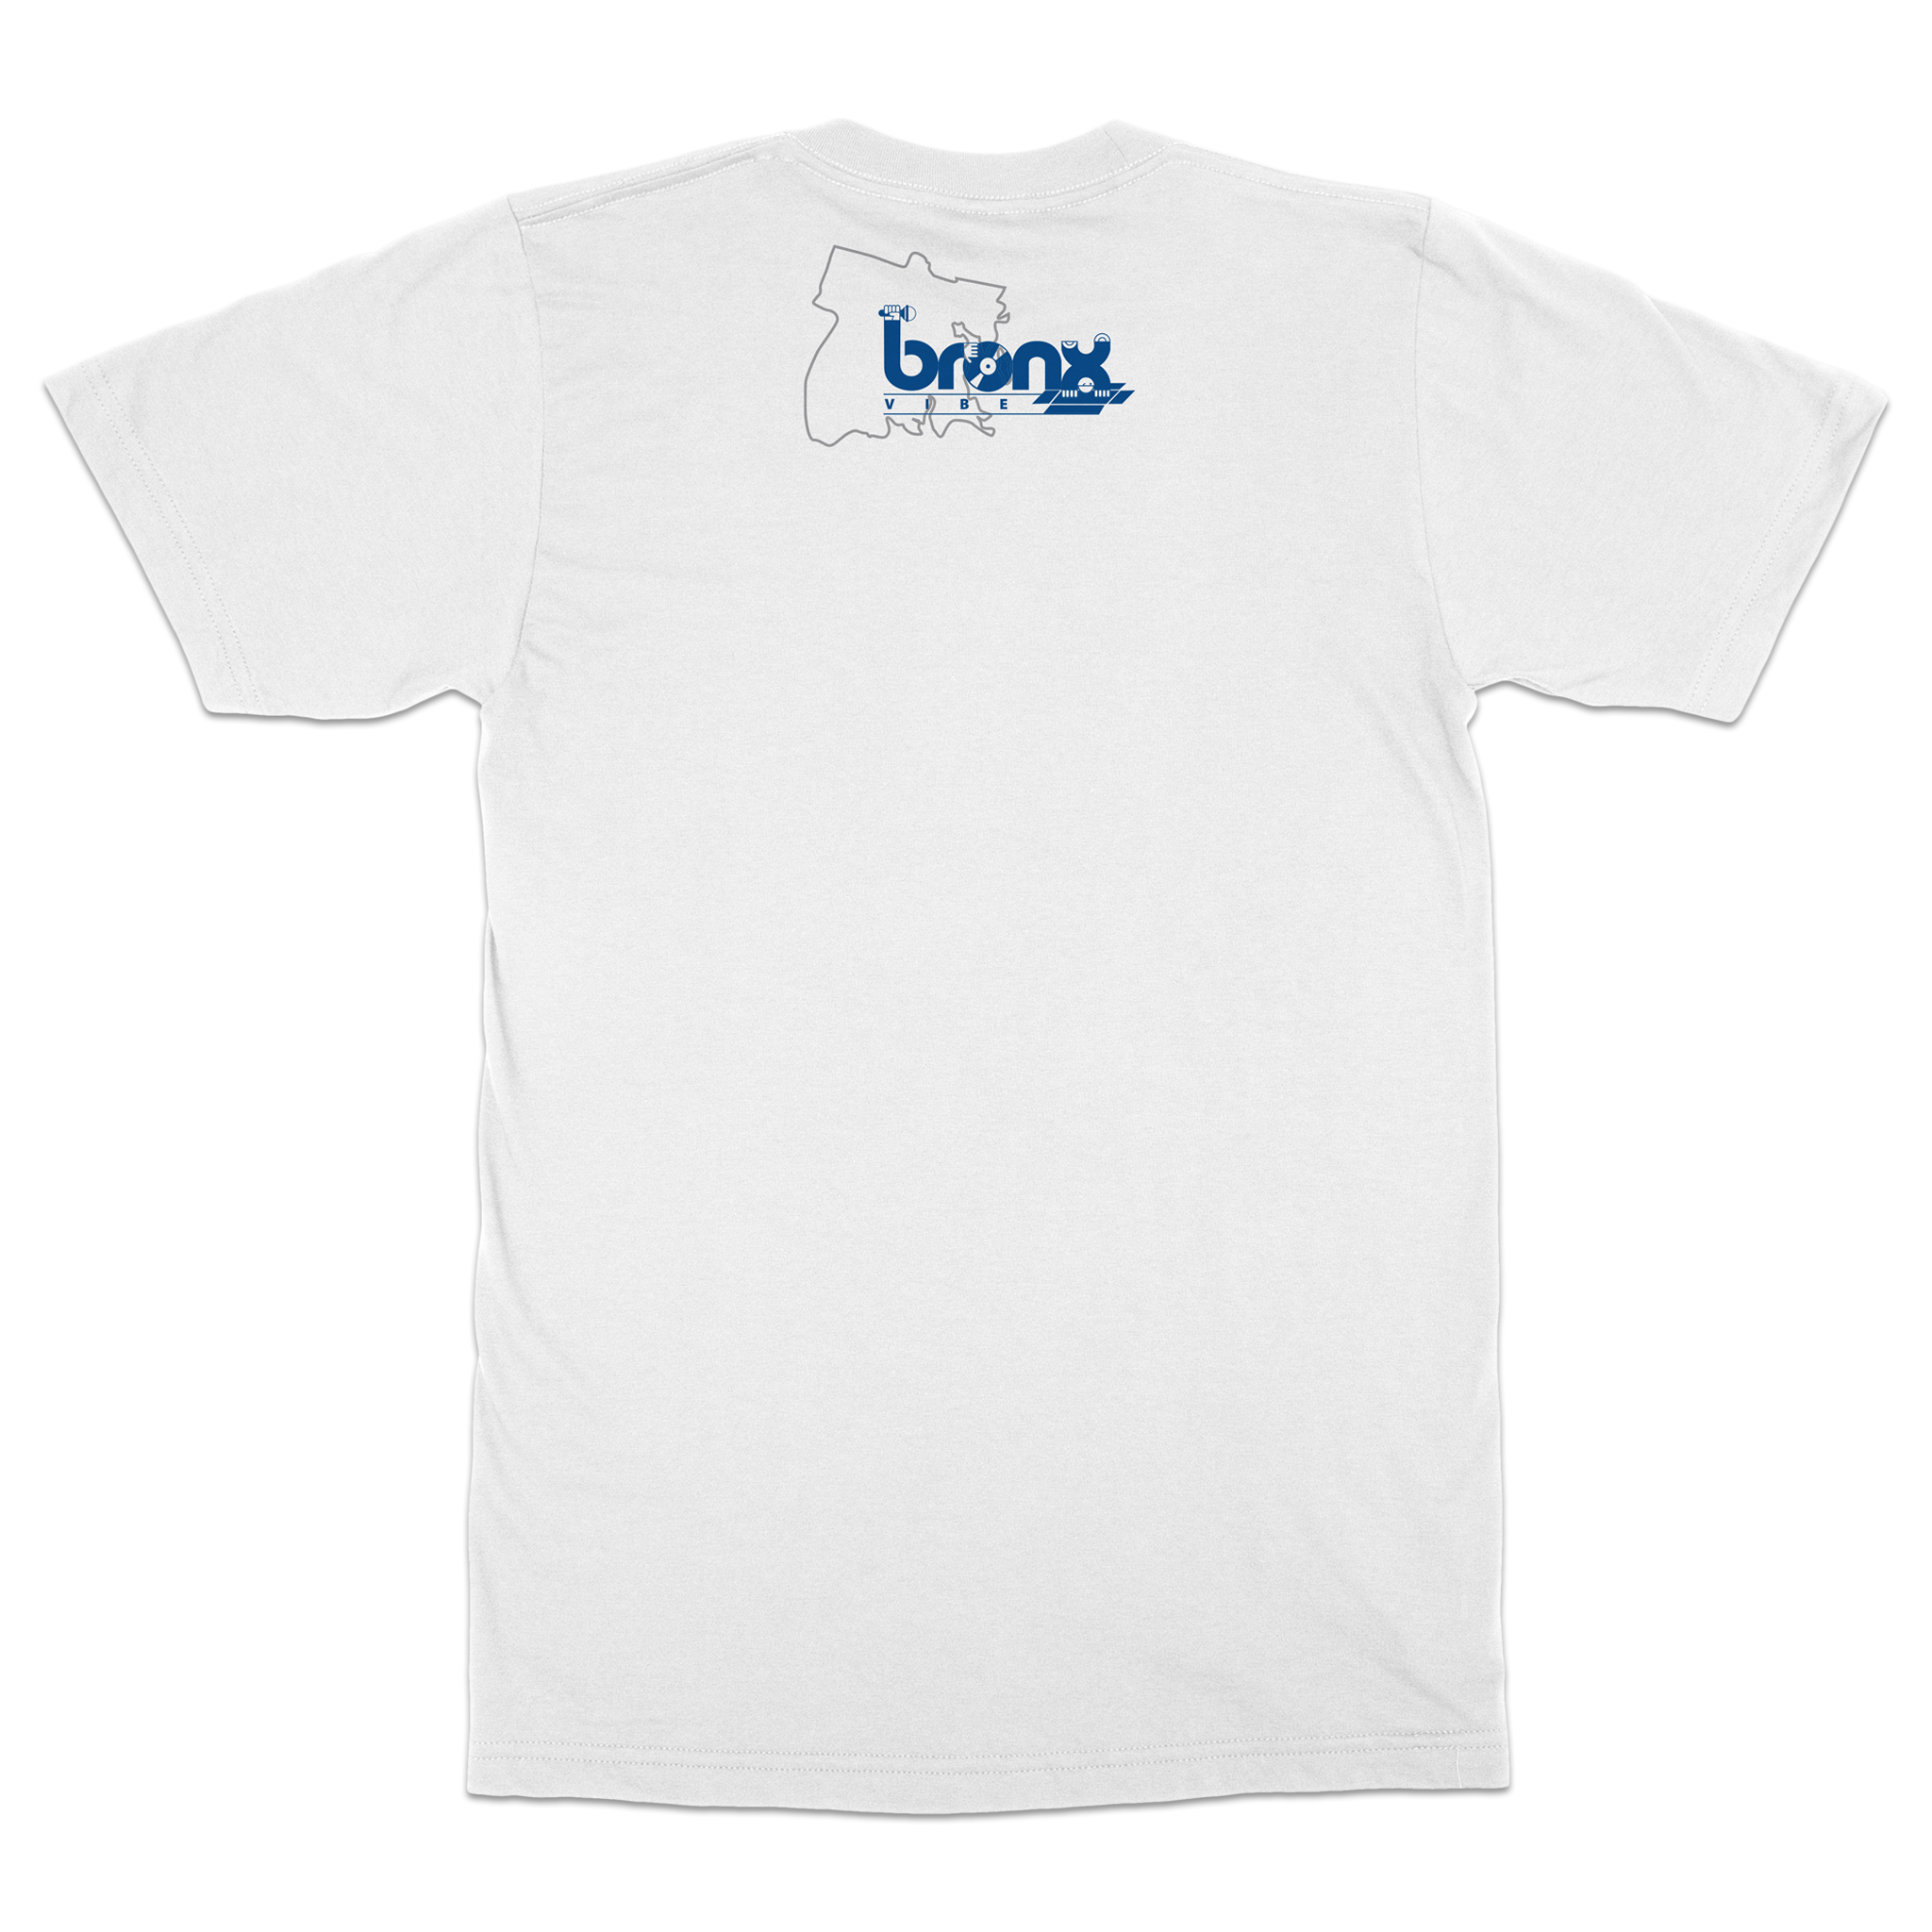 I AM THE BRONX T-Shirt Back in Heather Gray